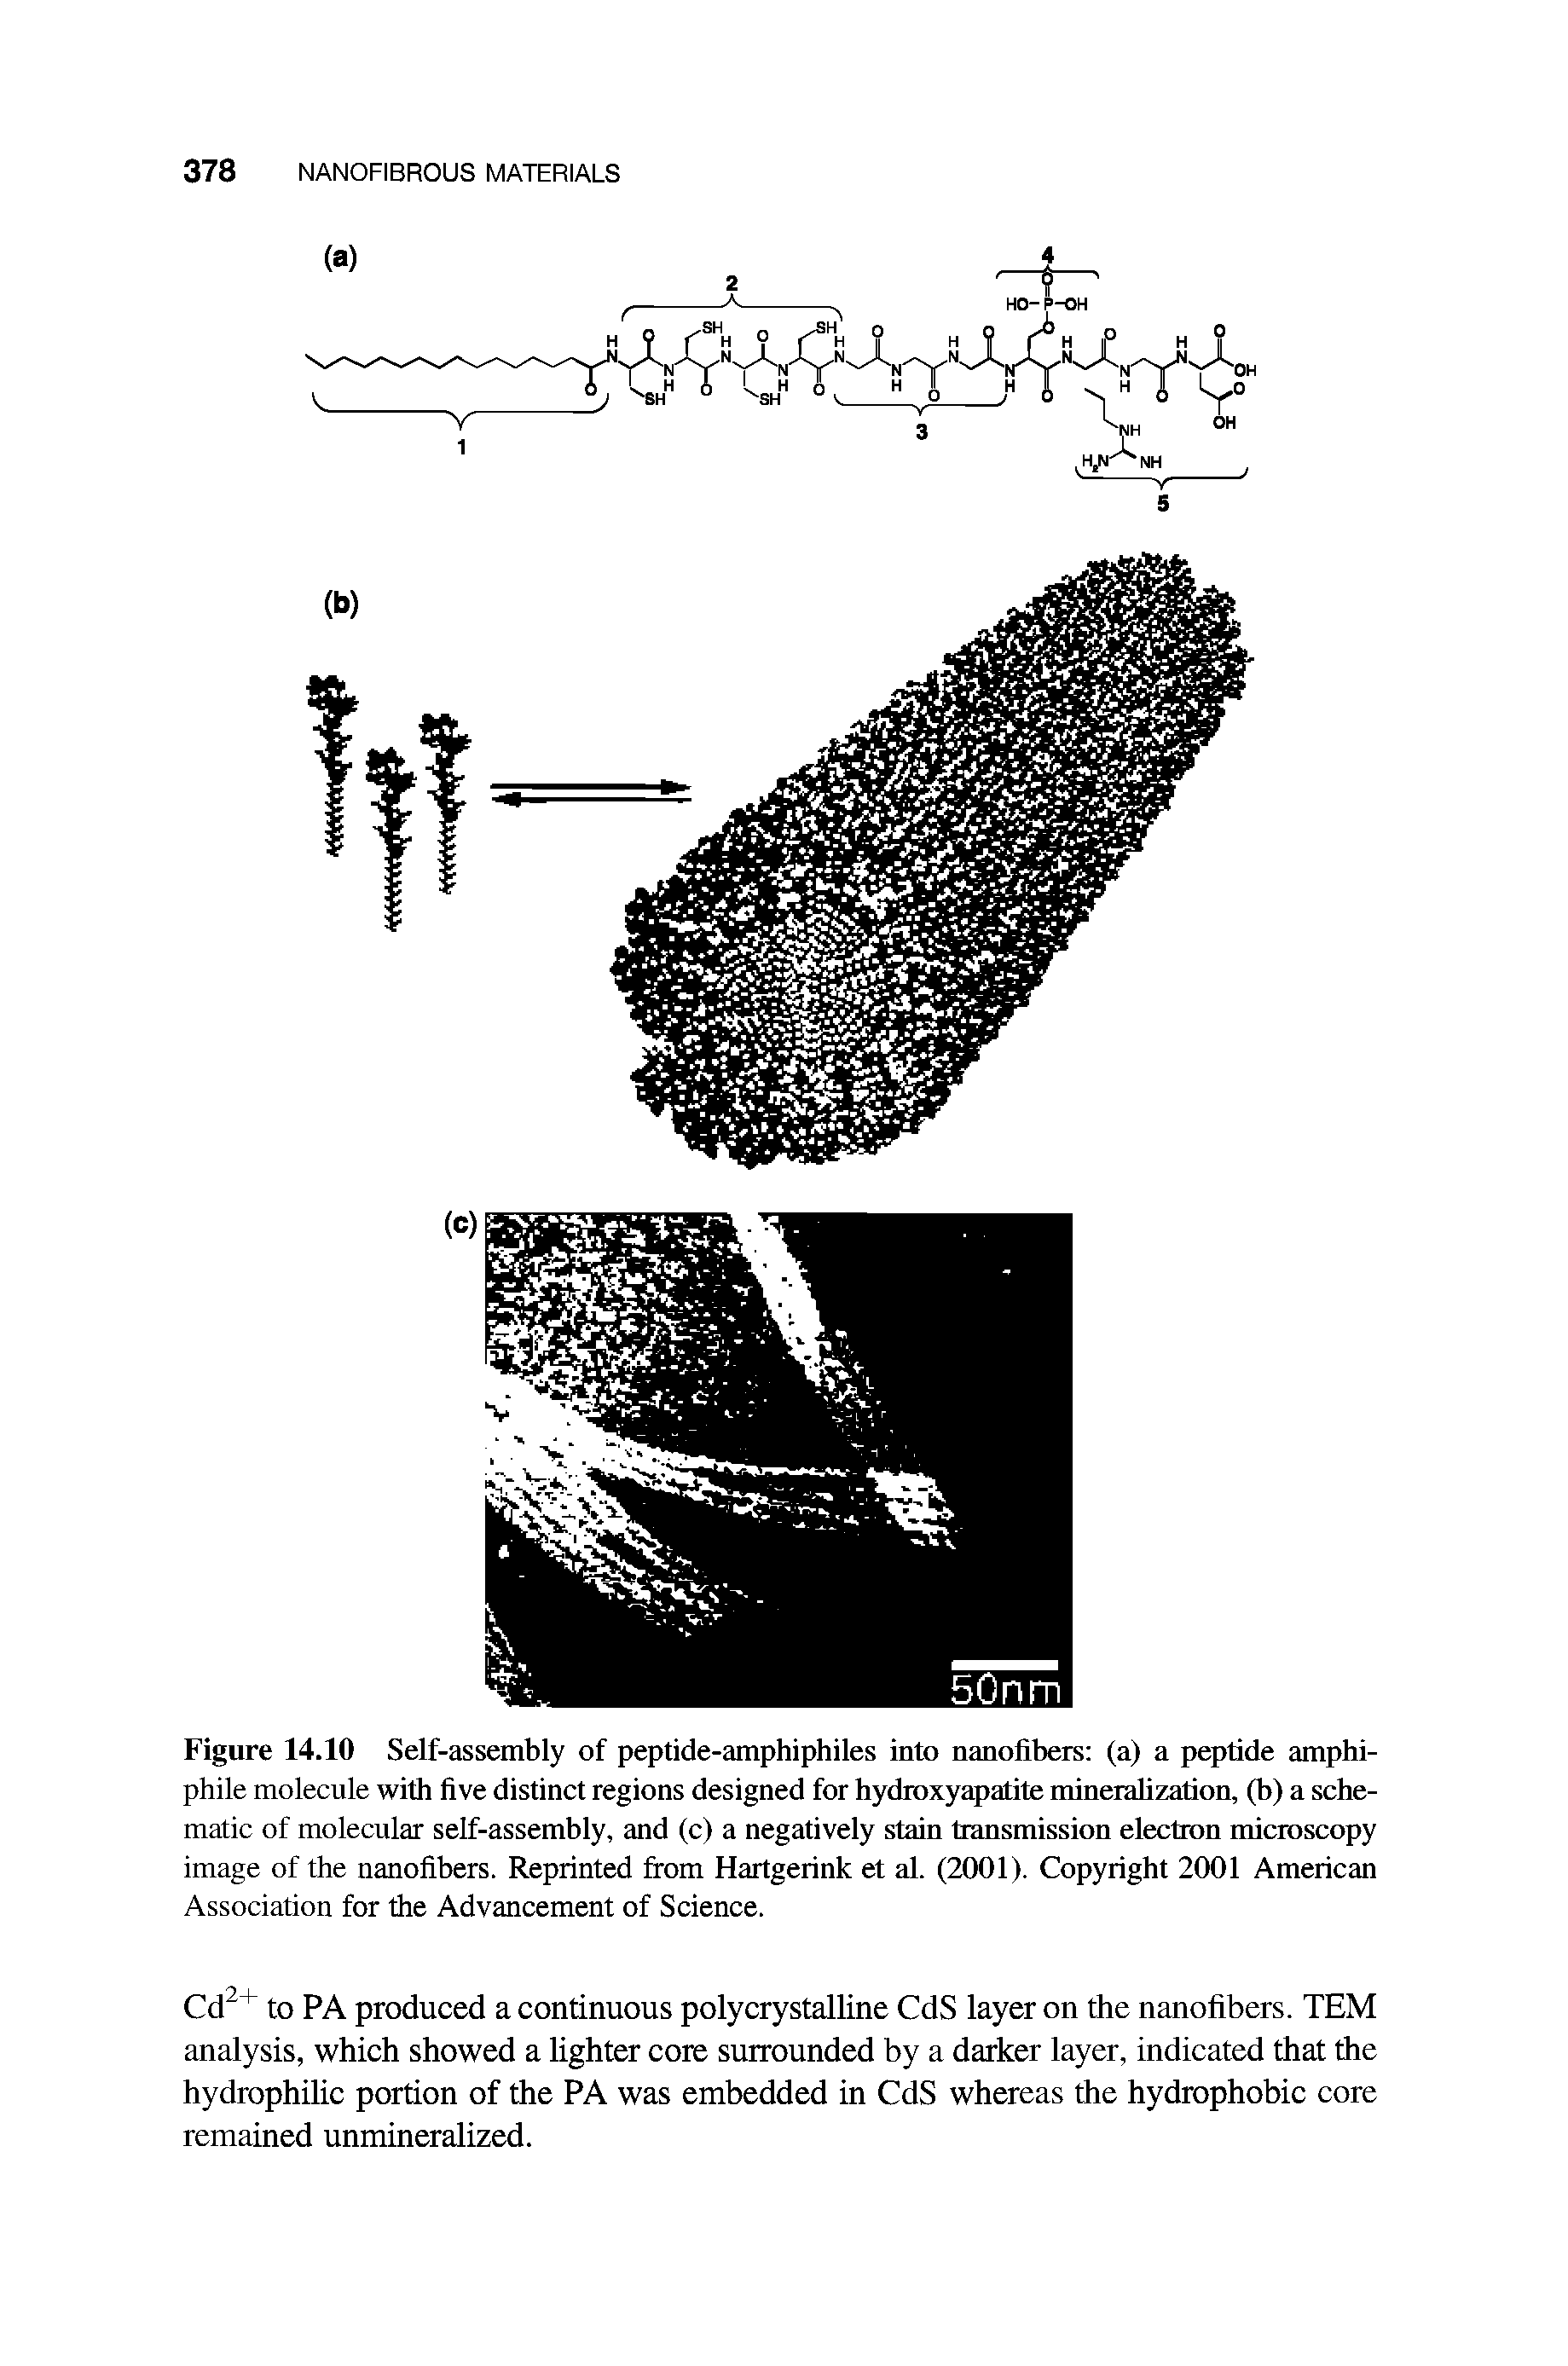 Figure 14.10 Self-assembly of peptide-amphiphiles into nanofibers (a) a peptide amphi-phile molecule with five distinct regions designed for hydroxyapatite mineralization, (b) a schematic of molecular self-assembly, and (c) a negatively stain transmission electron microscopy image of the nanofibers. Reprinted from Hartgerink et al. (2001). Copyright 2001 American Association for the Advancement of Science.